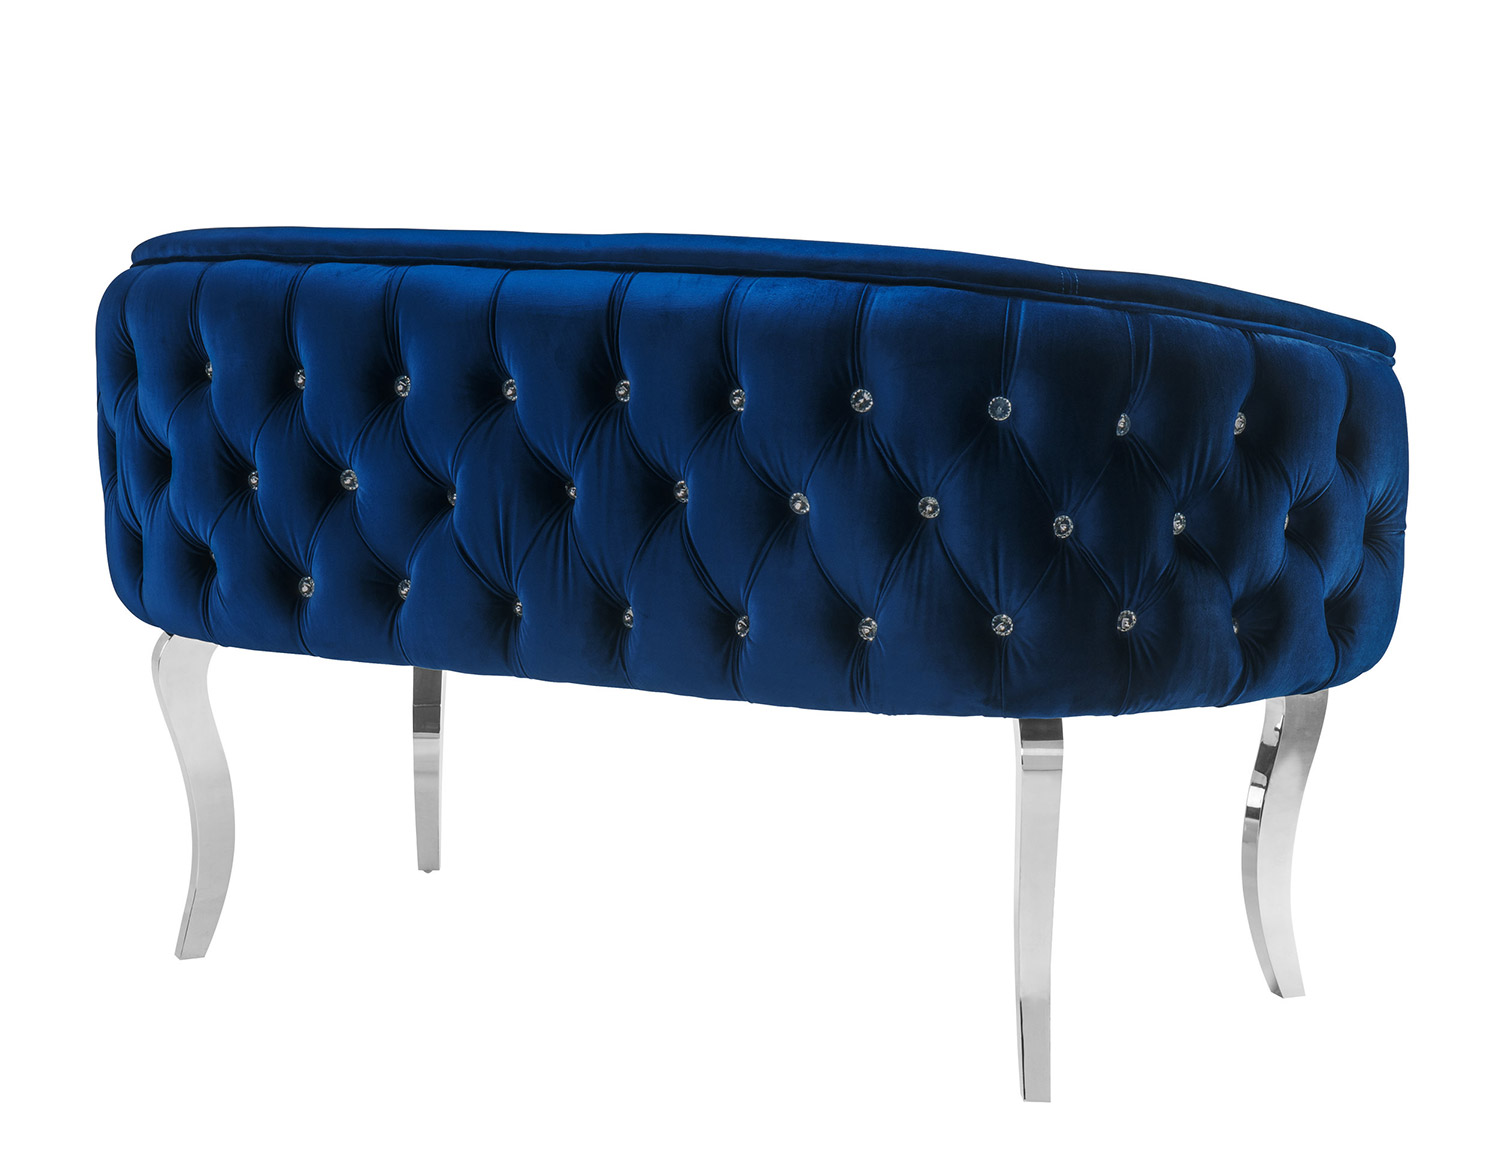 TOV Furniture Adina Loveseat with Silver Legs - Navy